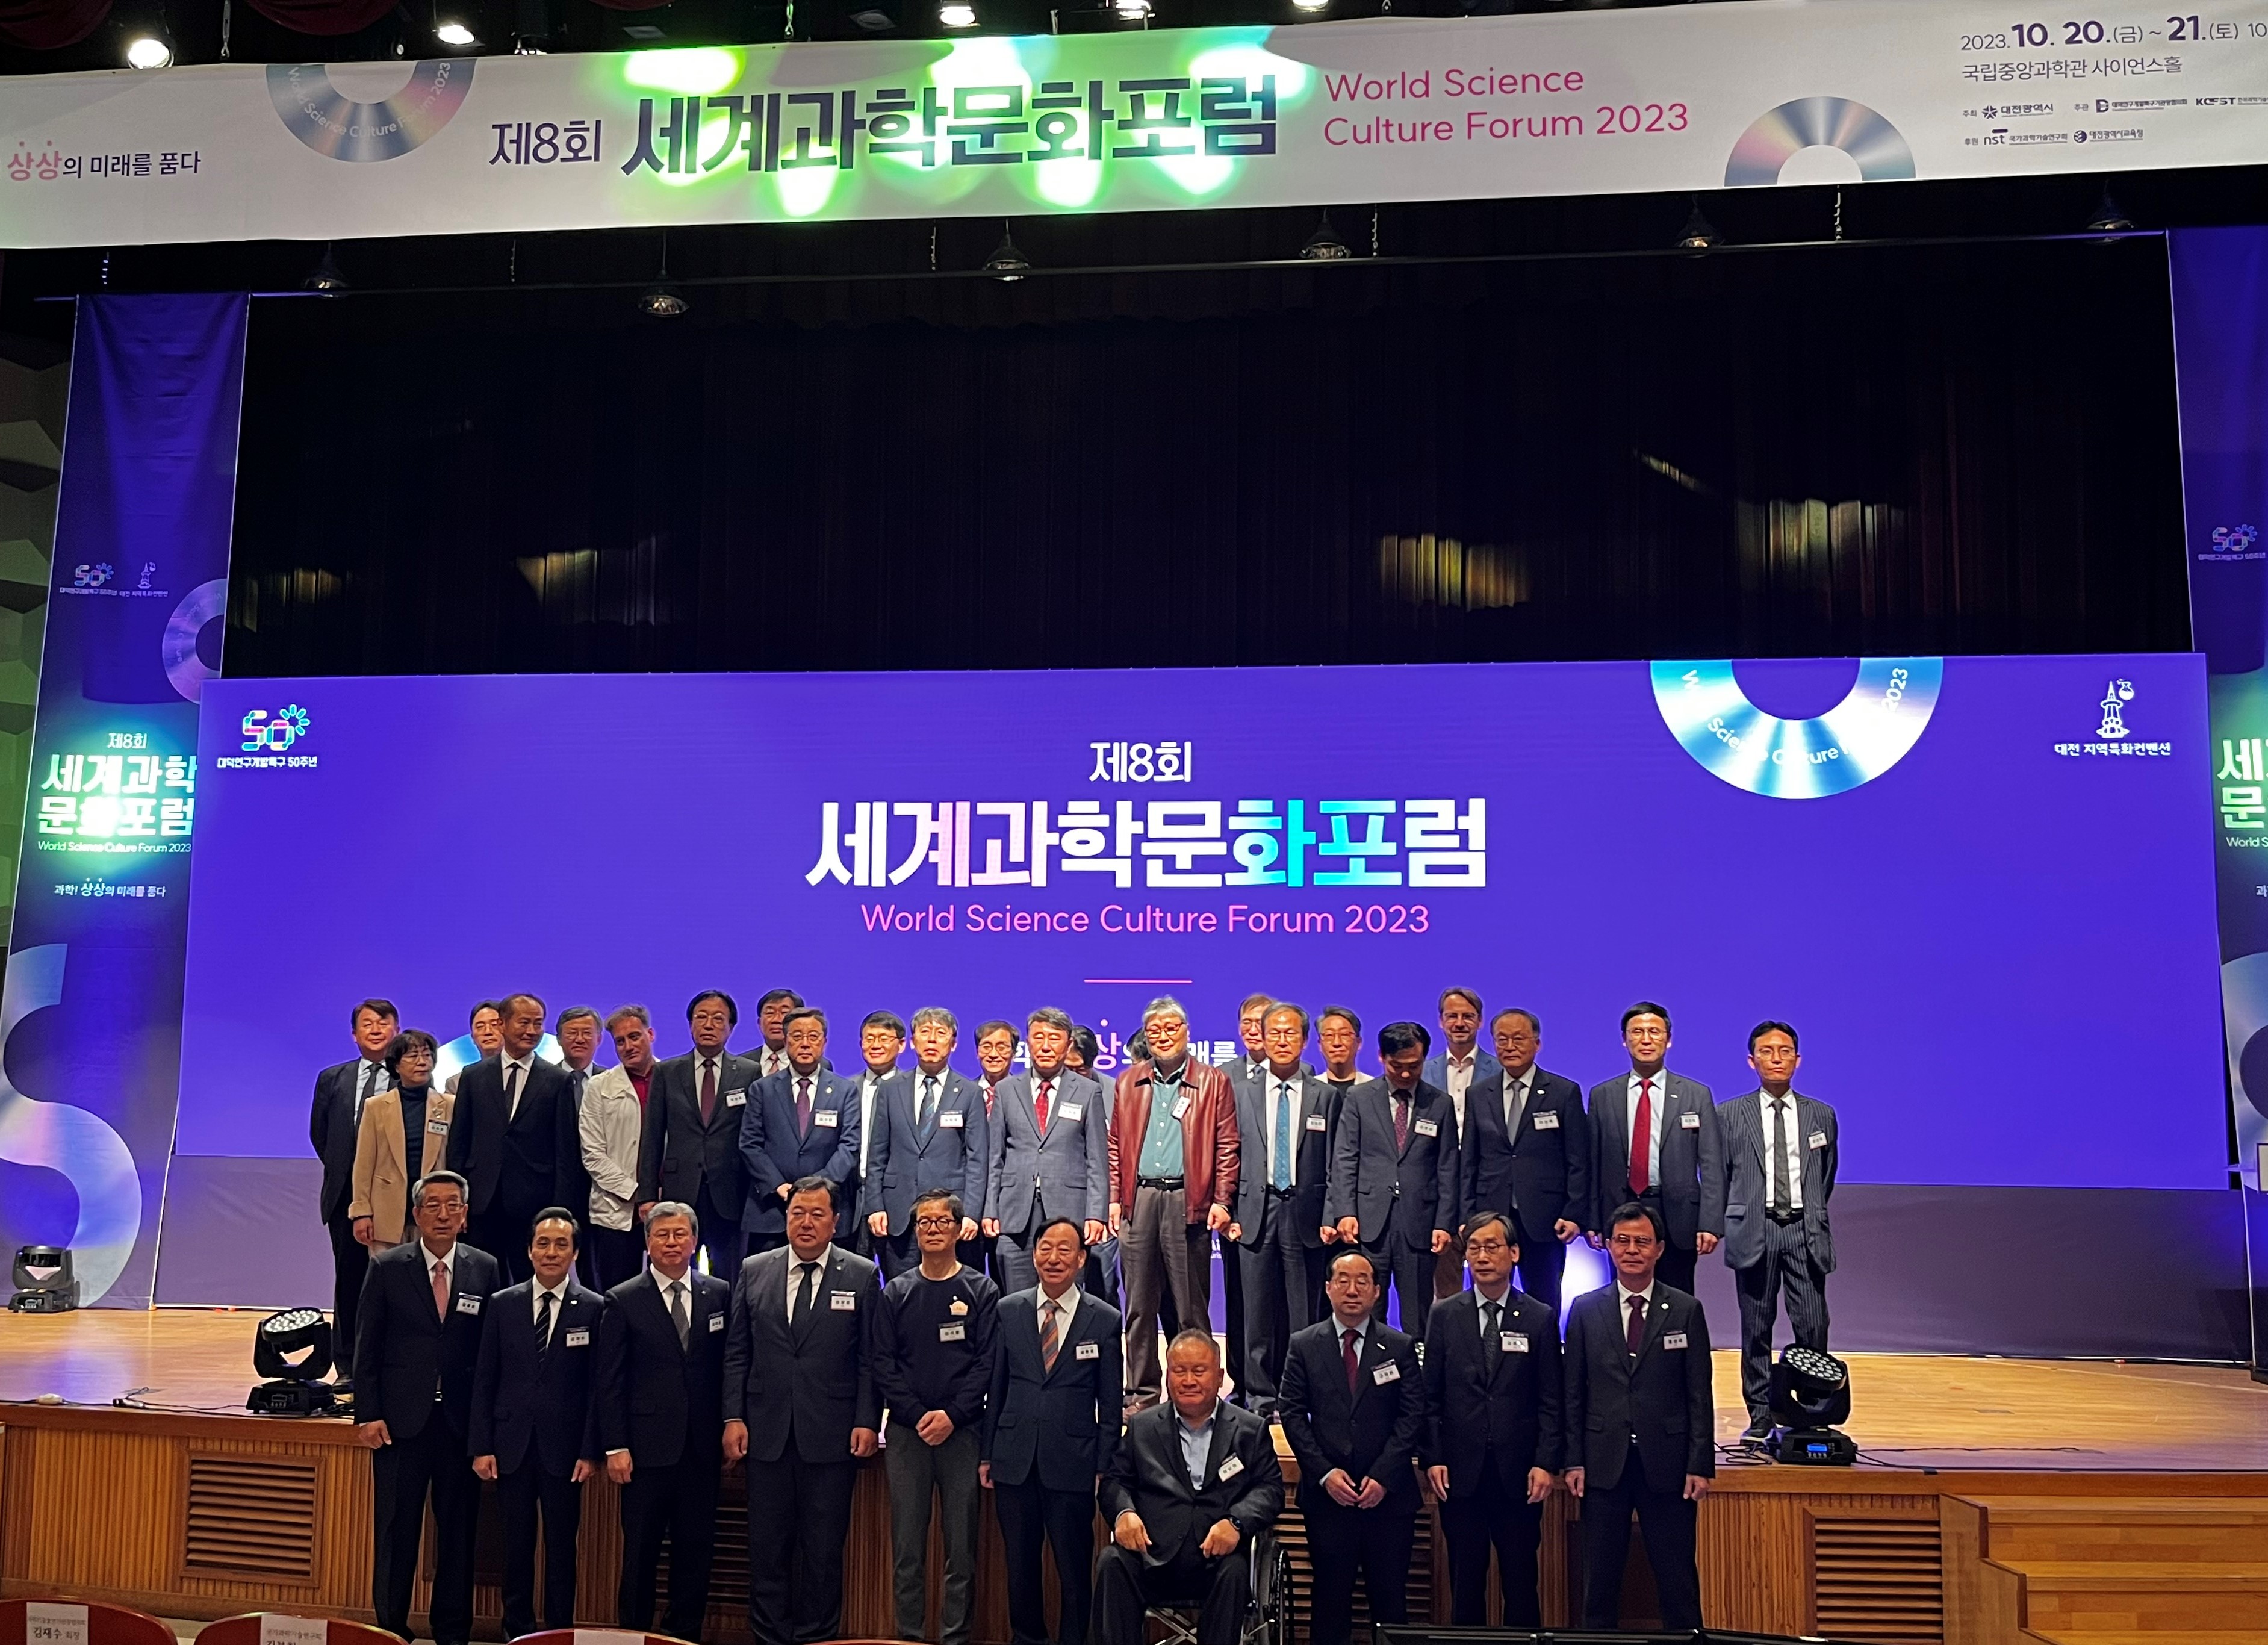 VIP of the 8th World Science Culture Forum including IBS President NOH Do Young (2nd row, 6th) and Director Andreas HEINRICH (back row, 1st) 